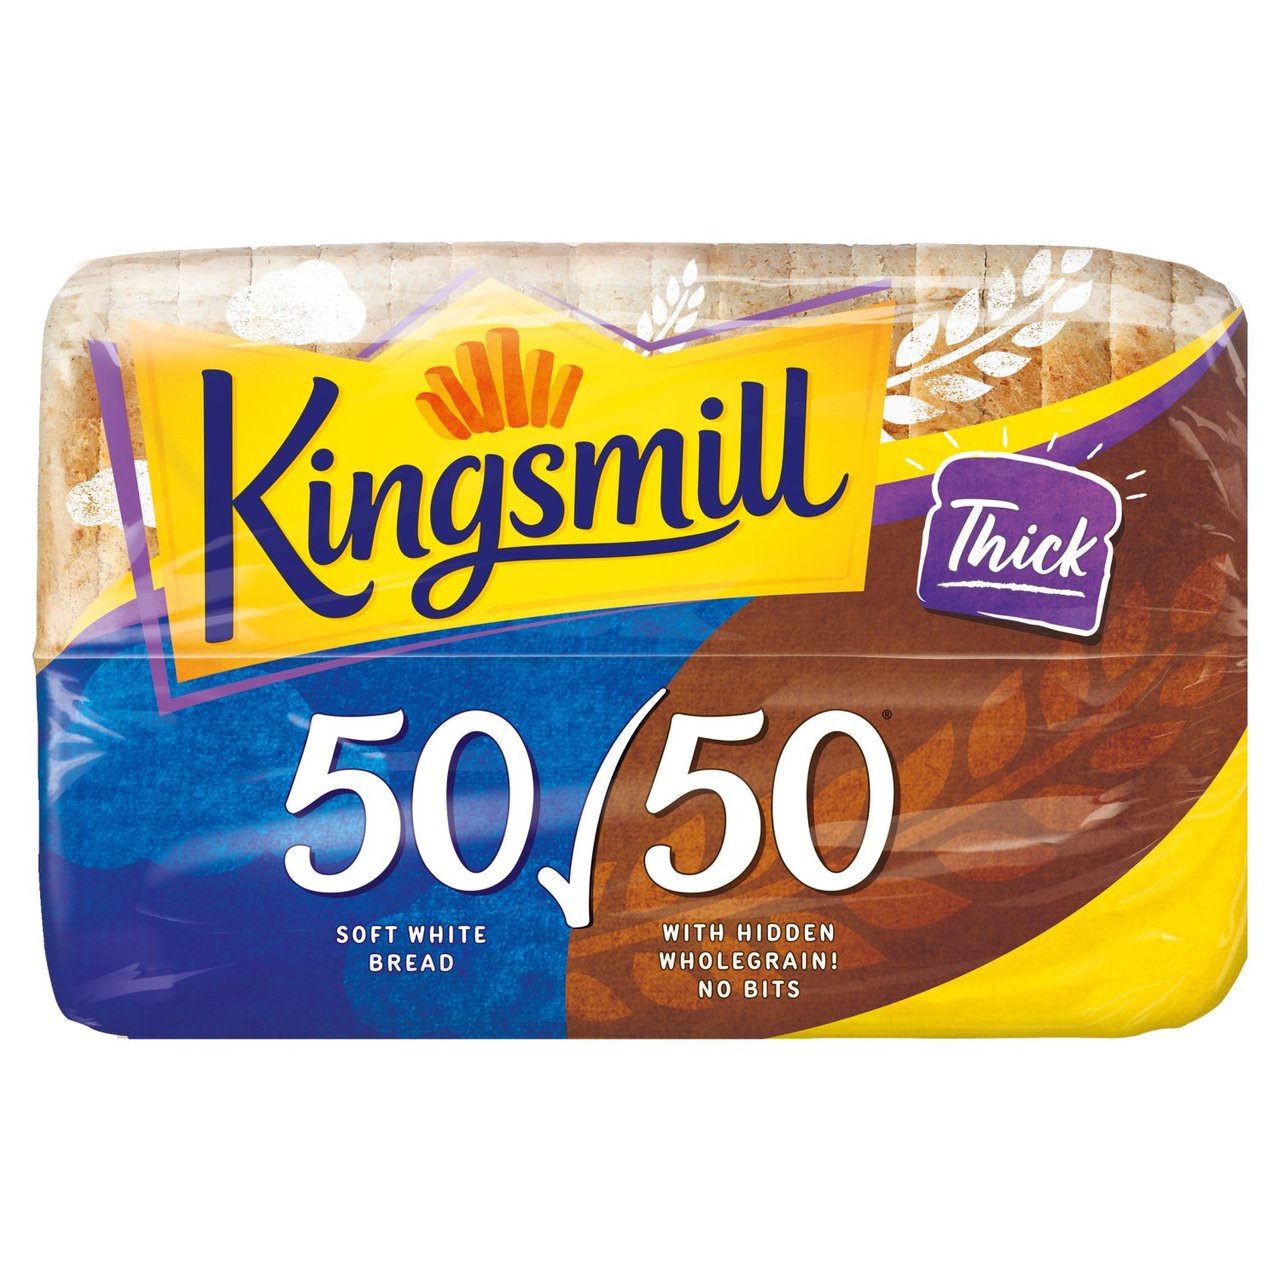 Kingsmill 50/50 Thick 800g